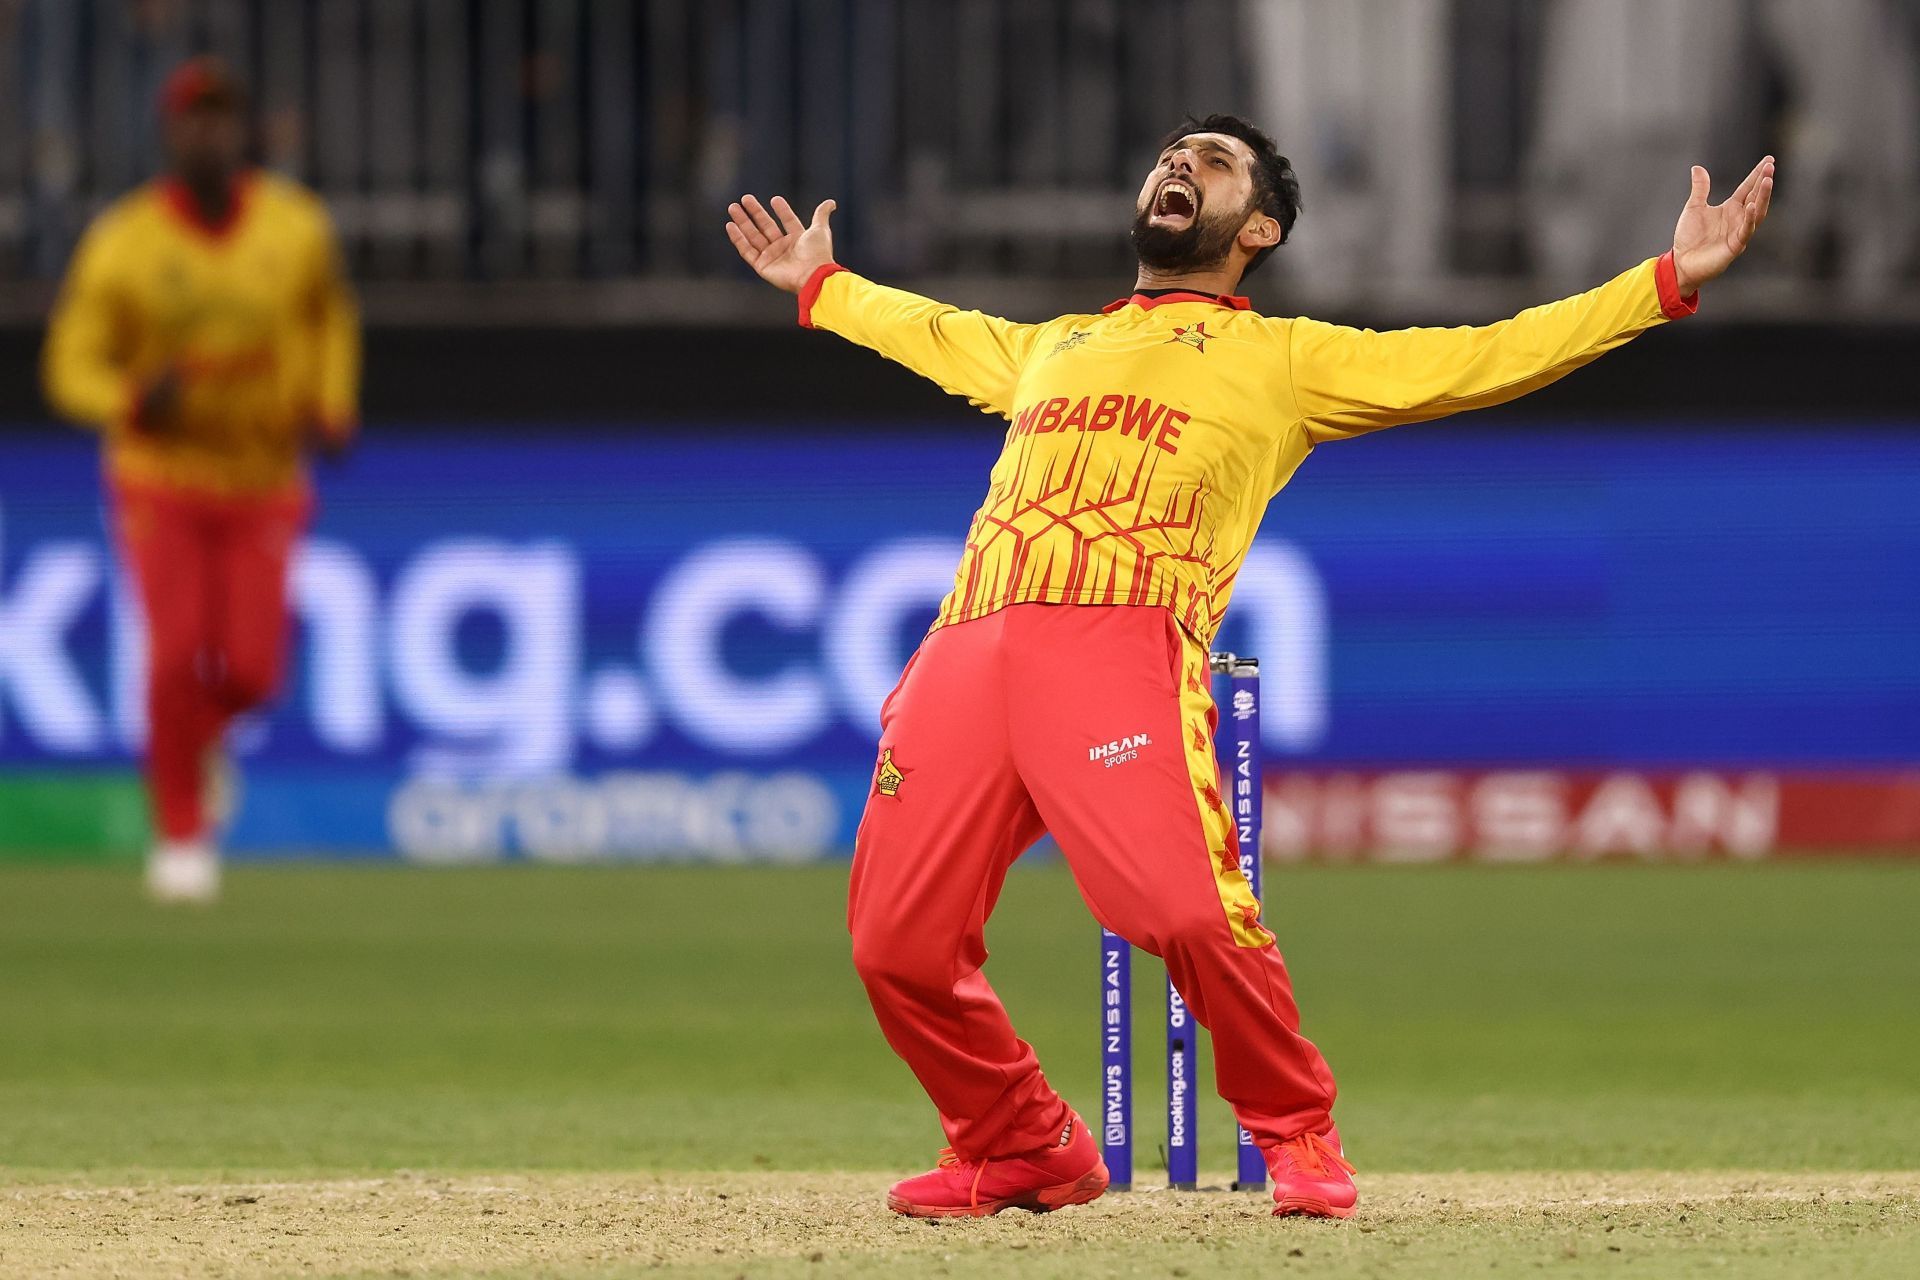 Sikandar Raza has been in good form of late